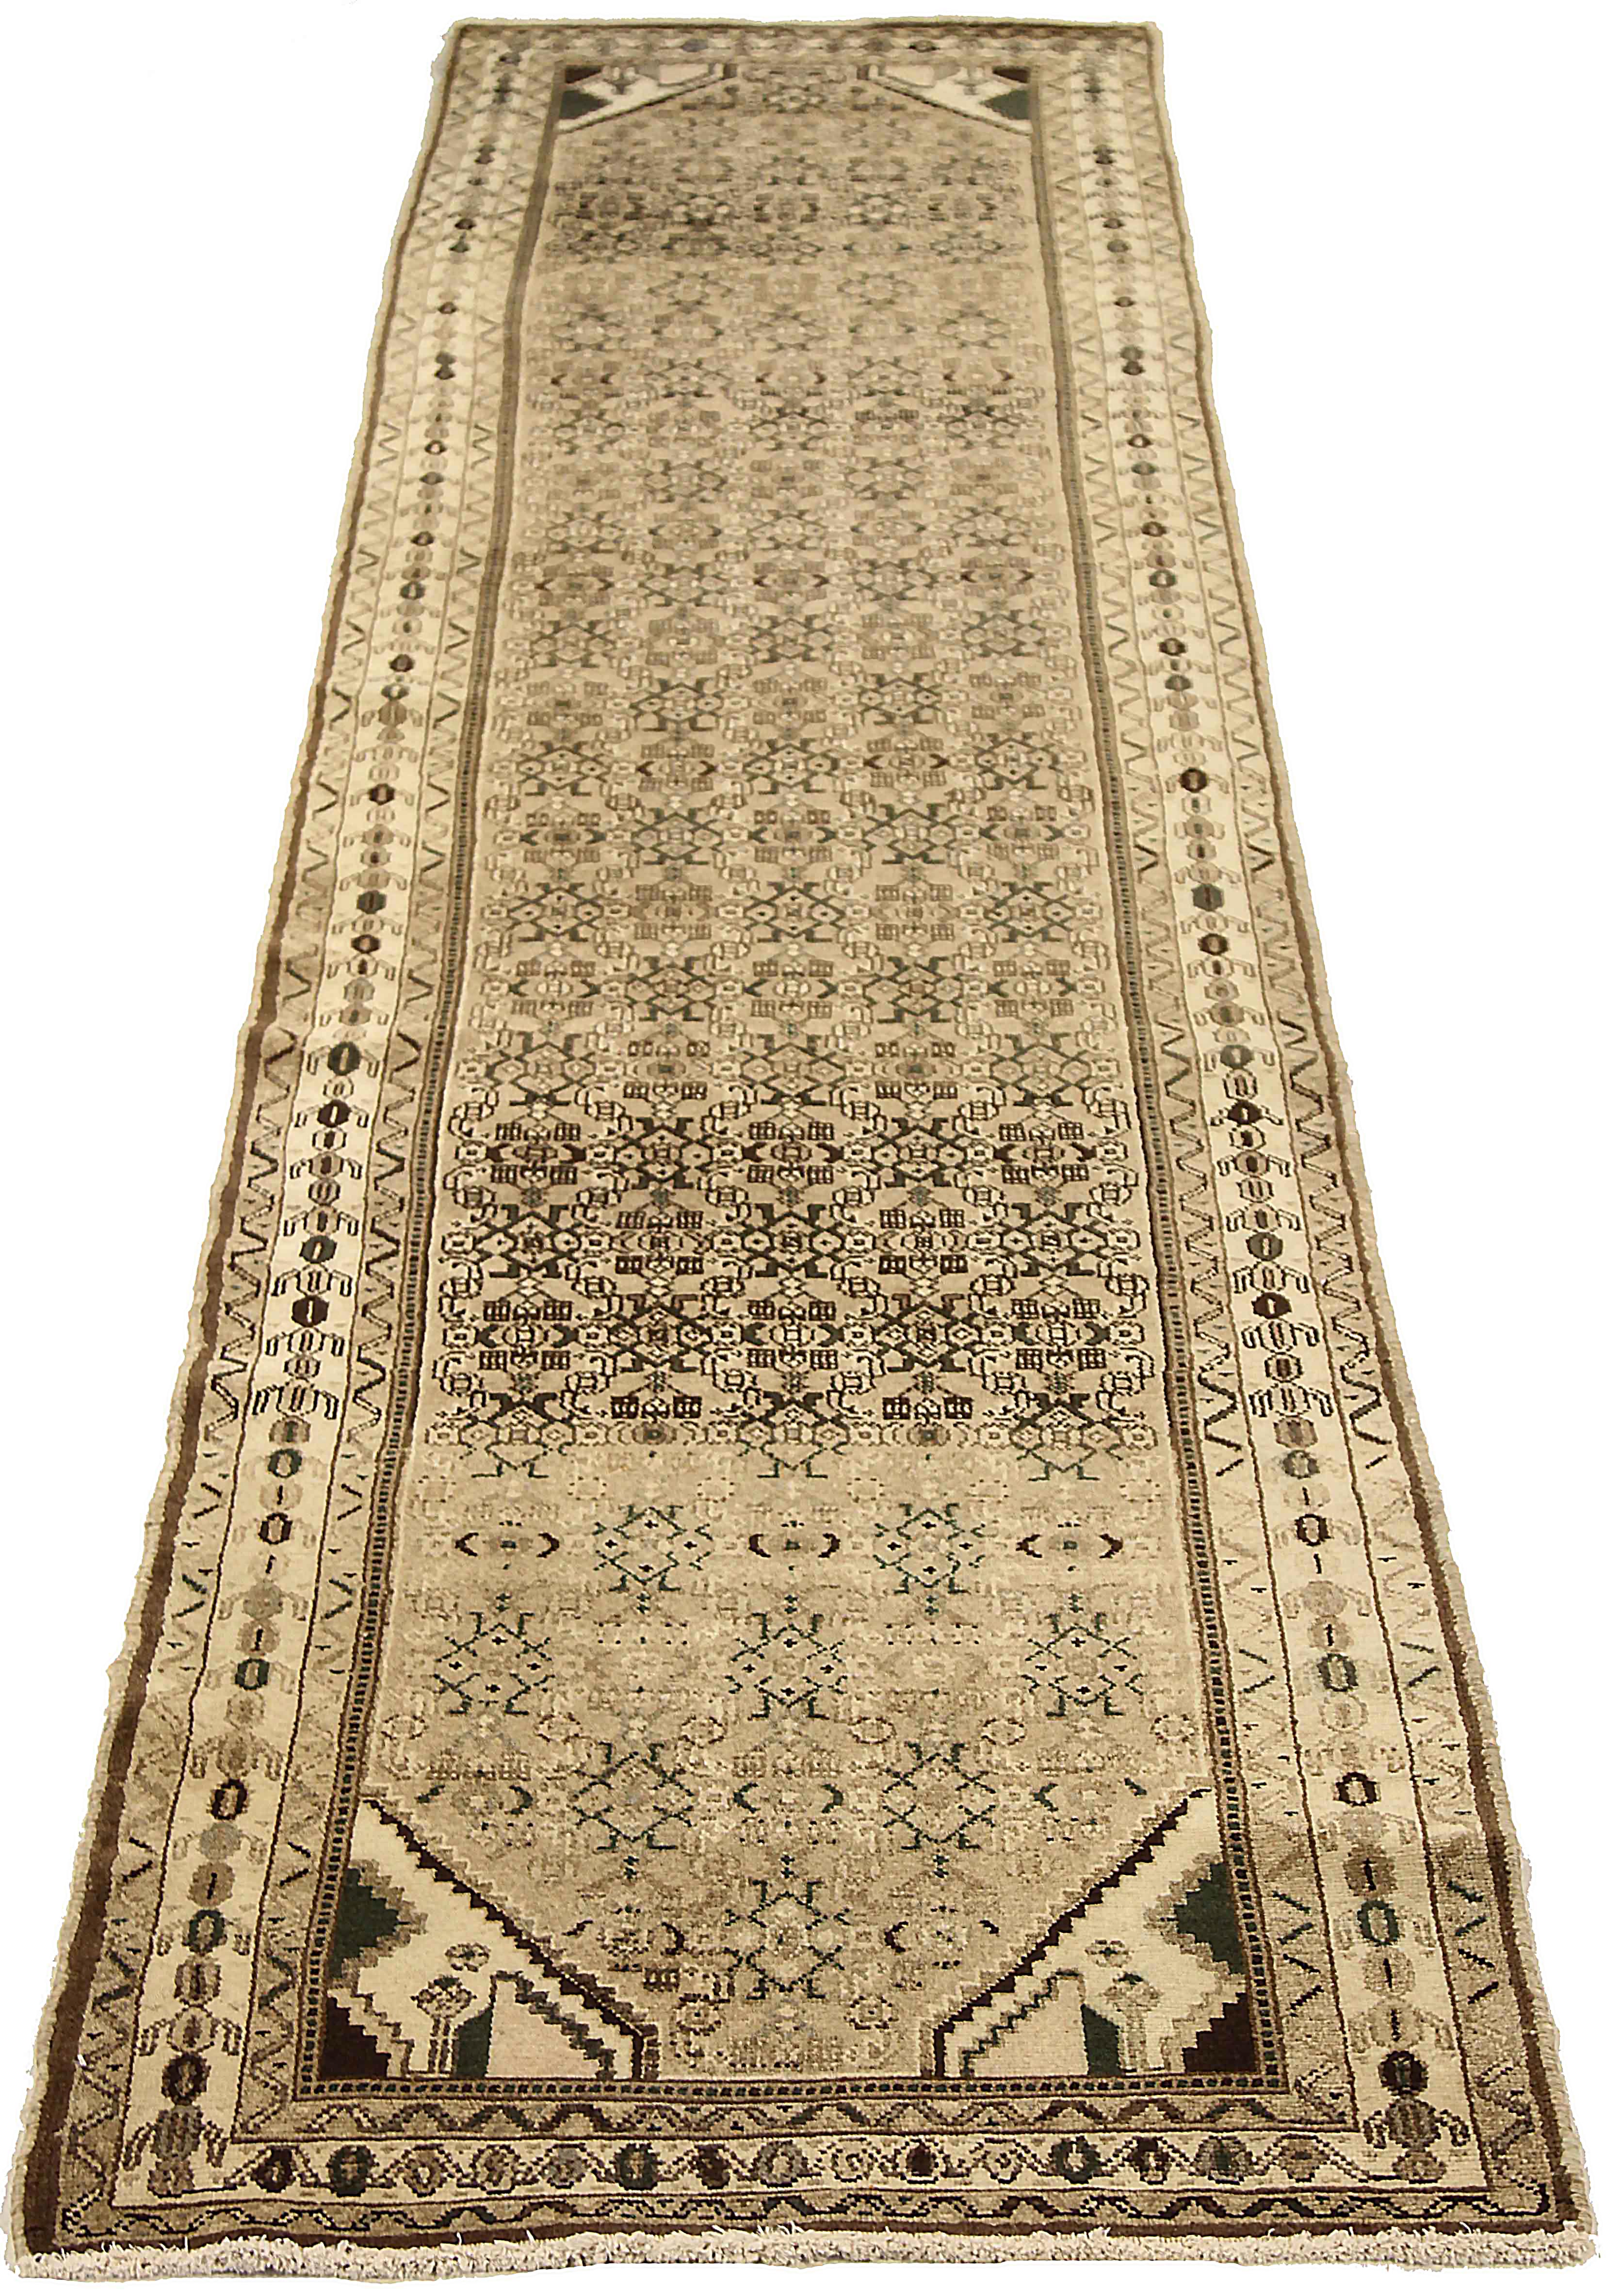 Antique Persian rug handwoven from the finest sheep’s wool. It’s colored with all-natural vegetable dyes that are safe for humans and pets. It’s a traditional Malayer design featuring floral details on an ivory field. It’s a lovely piece to showcase